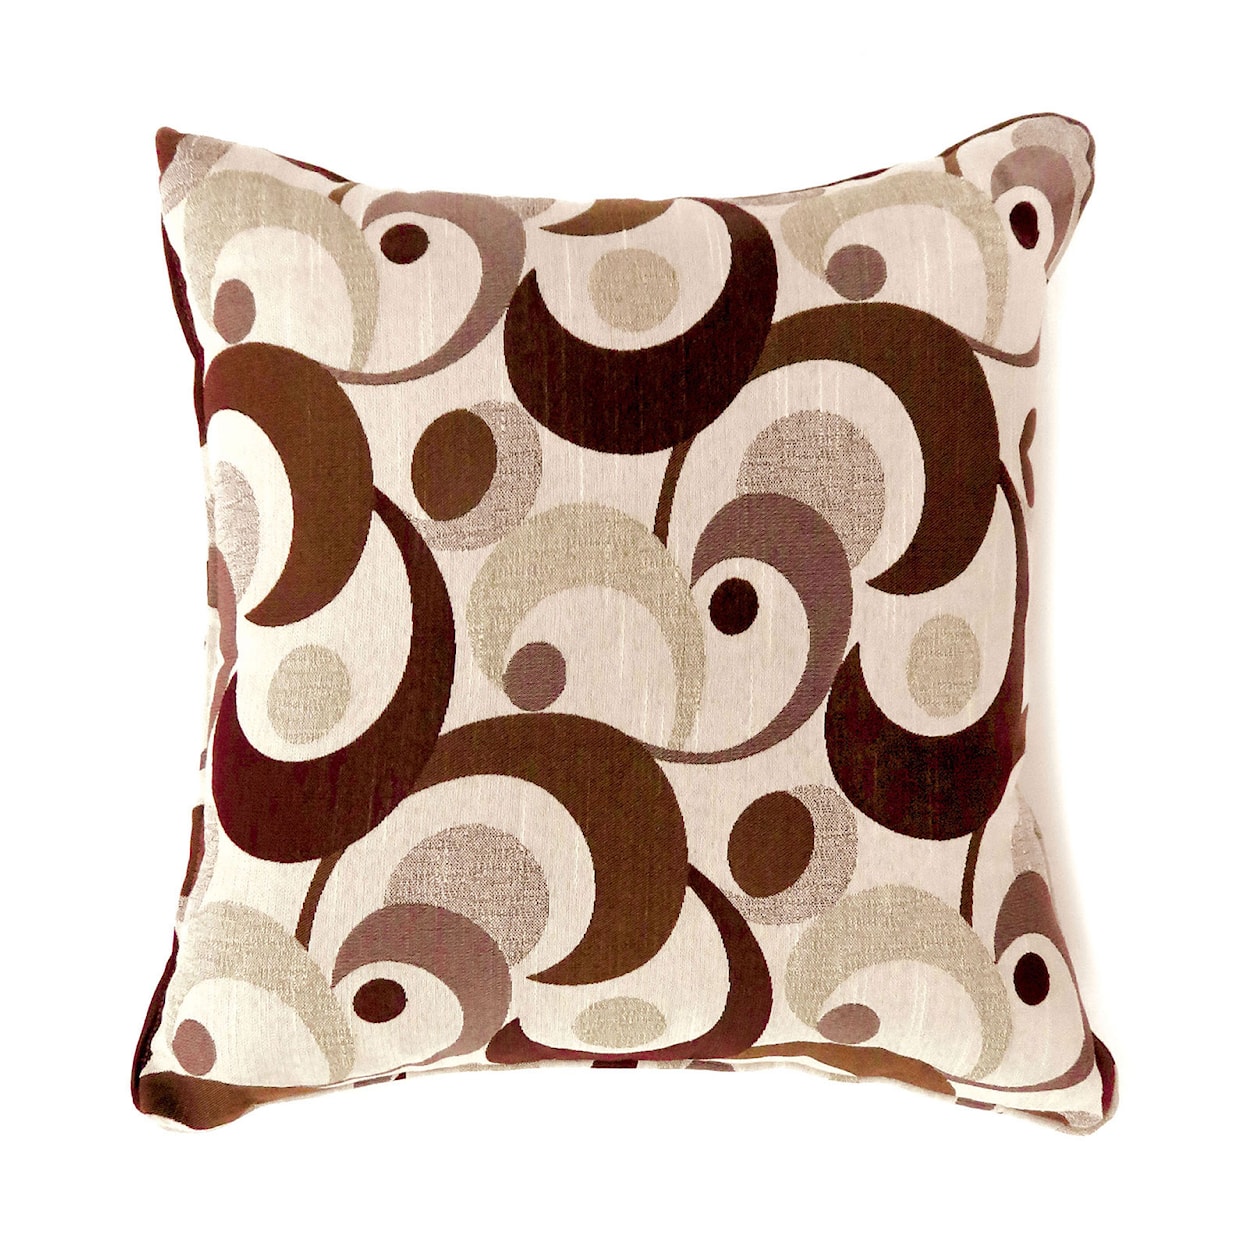 Furniture of America Swoosh Set of Two 17" X 17" Pillows, Brown